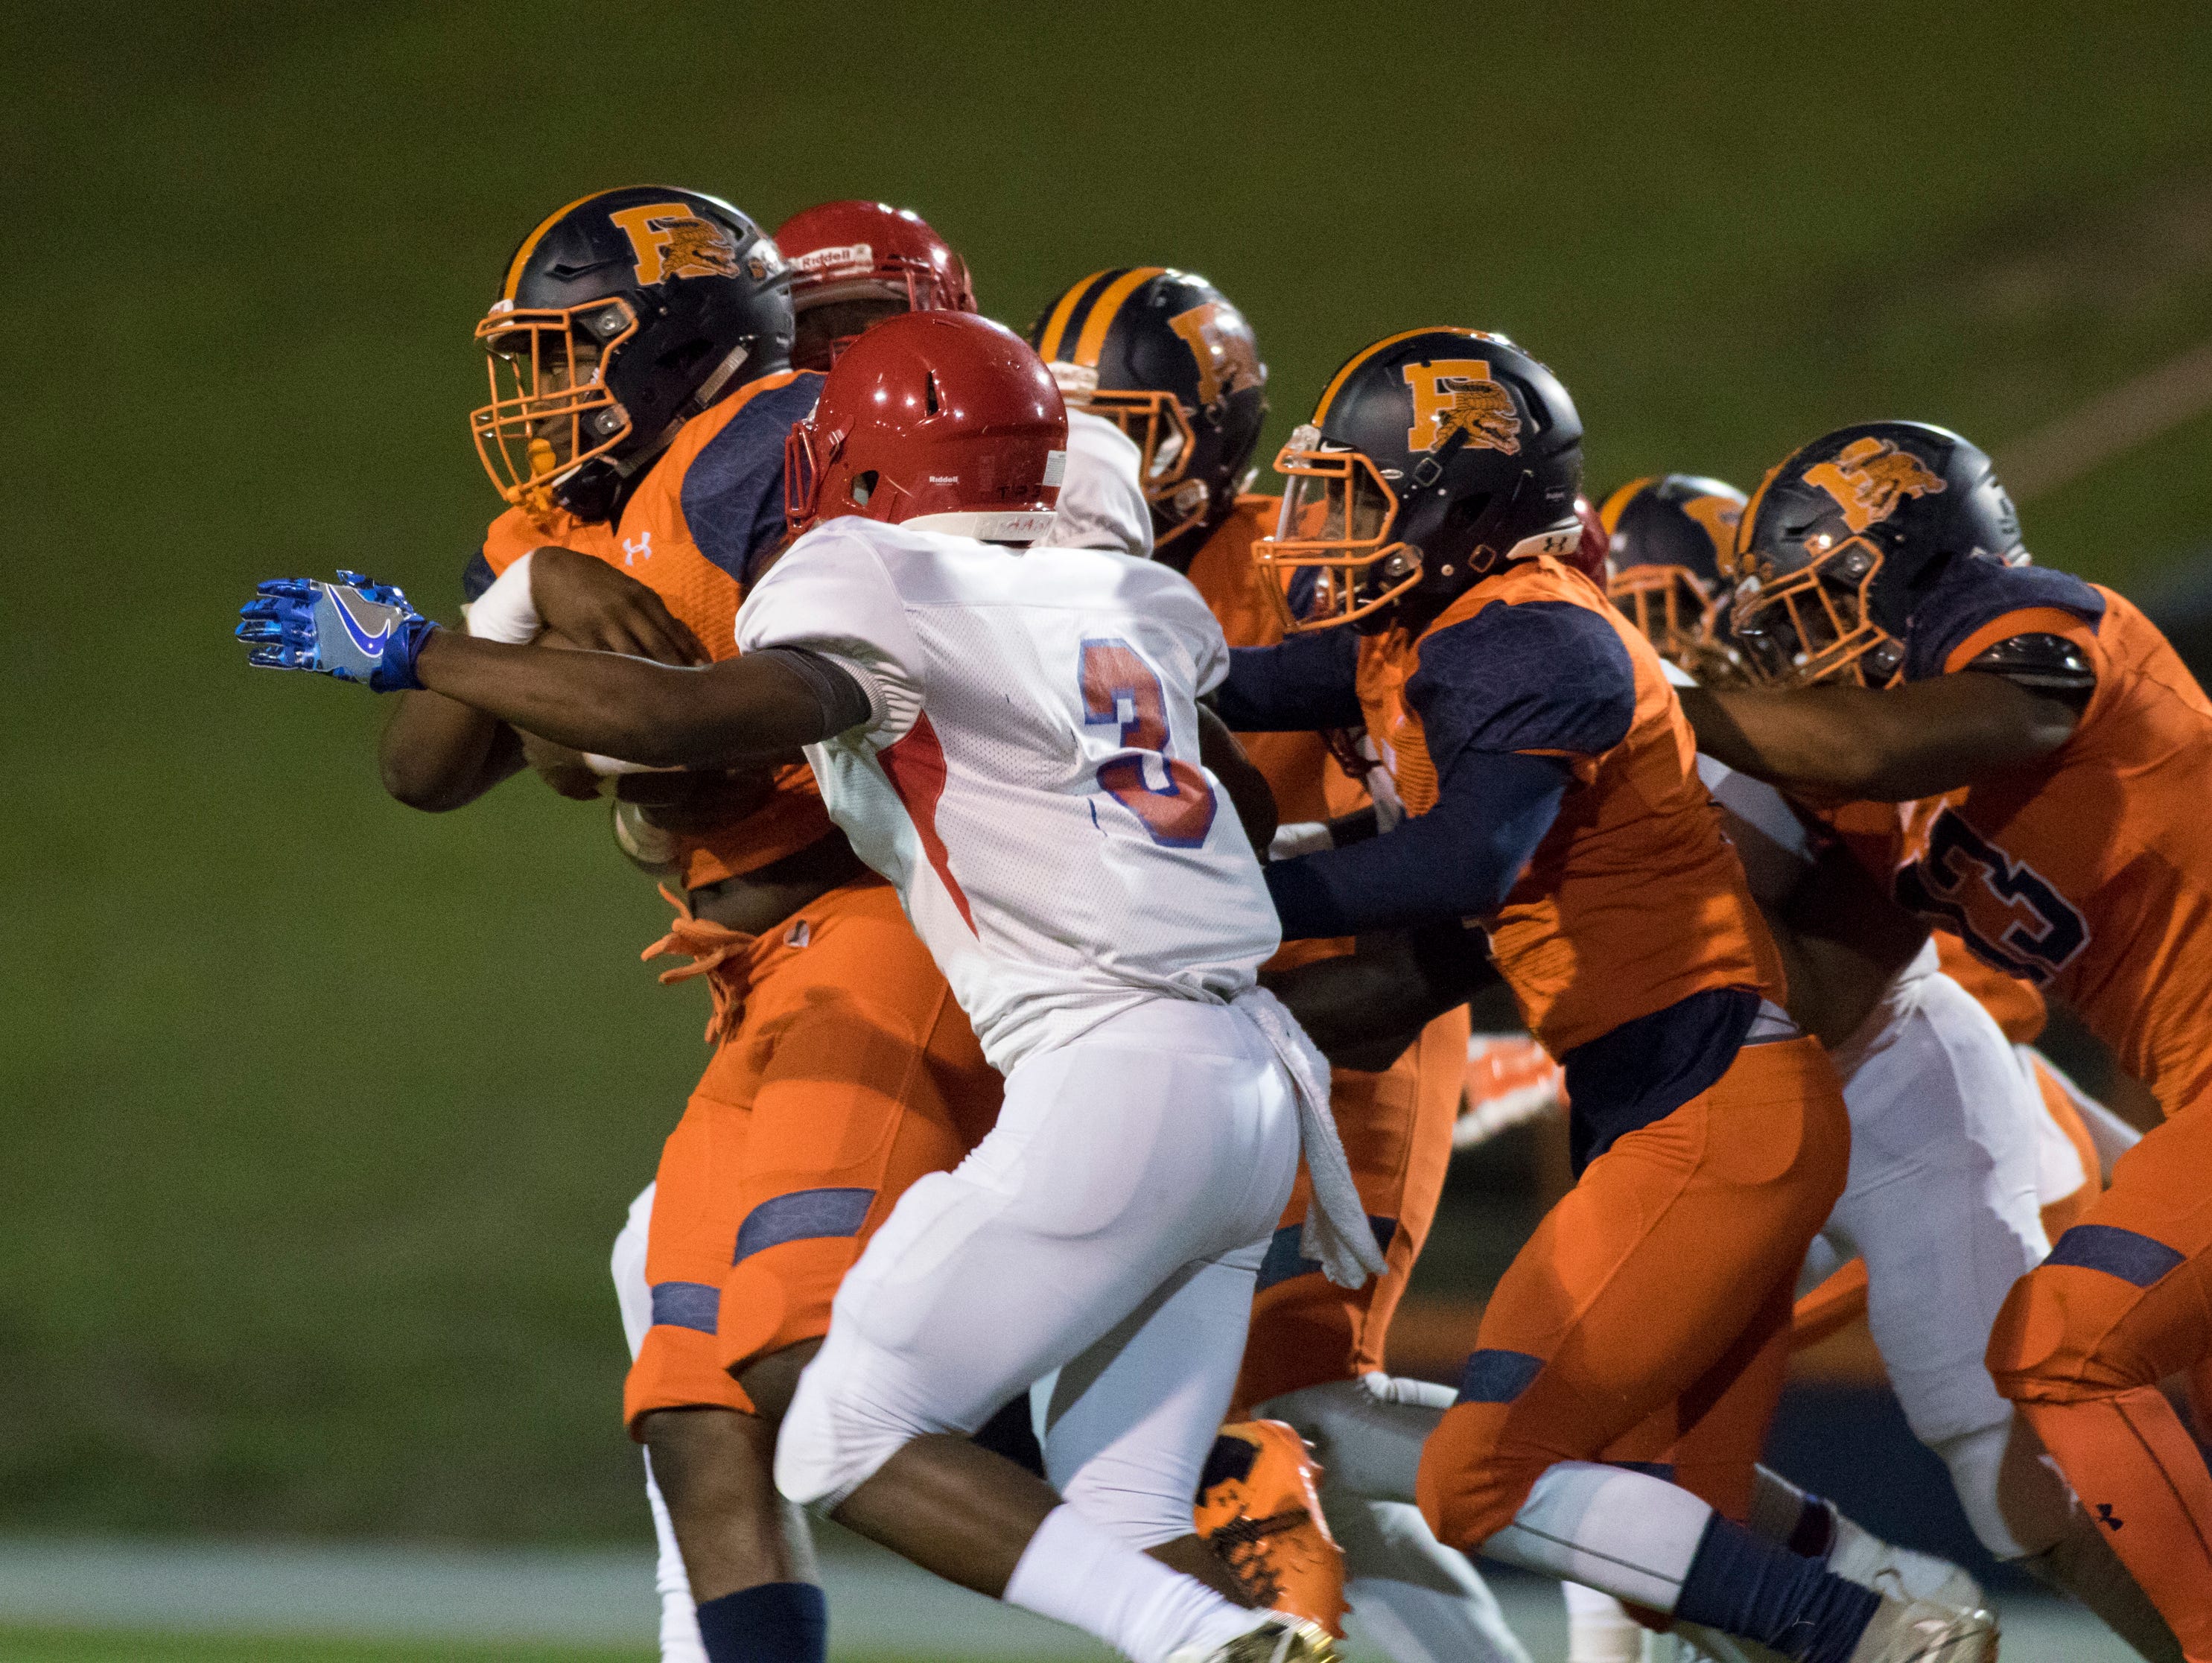 Escambia's Amarqez Moore (10) carries the ball during the Pine Forest v Escambia football game on Friday, September 30, 2016.